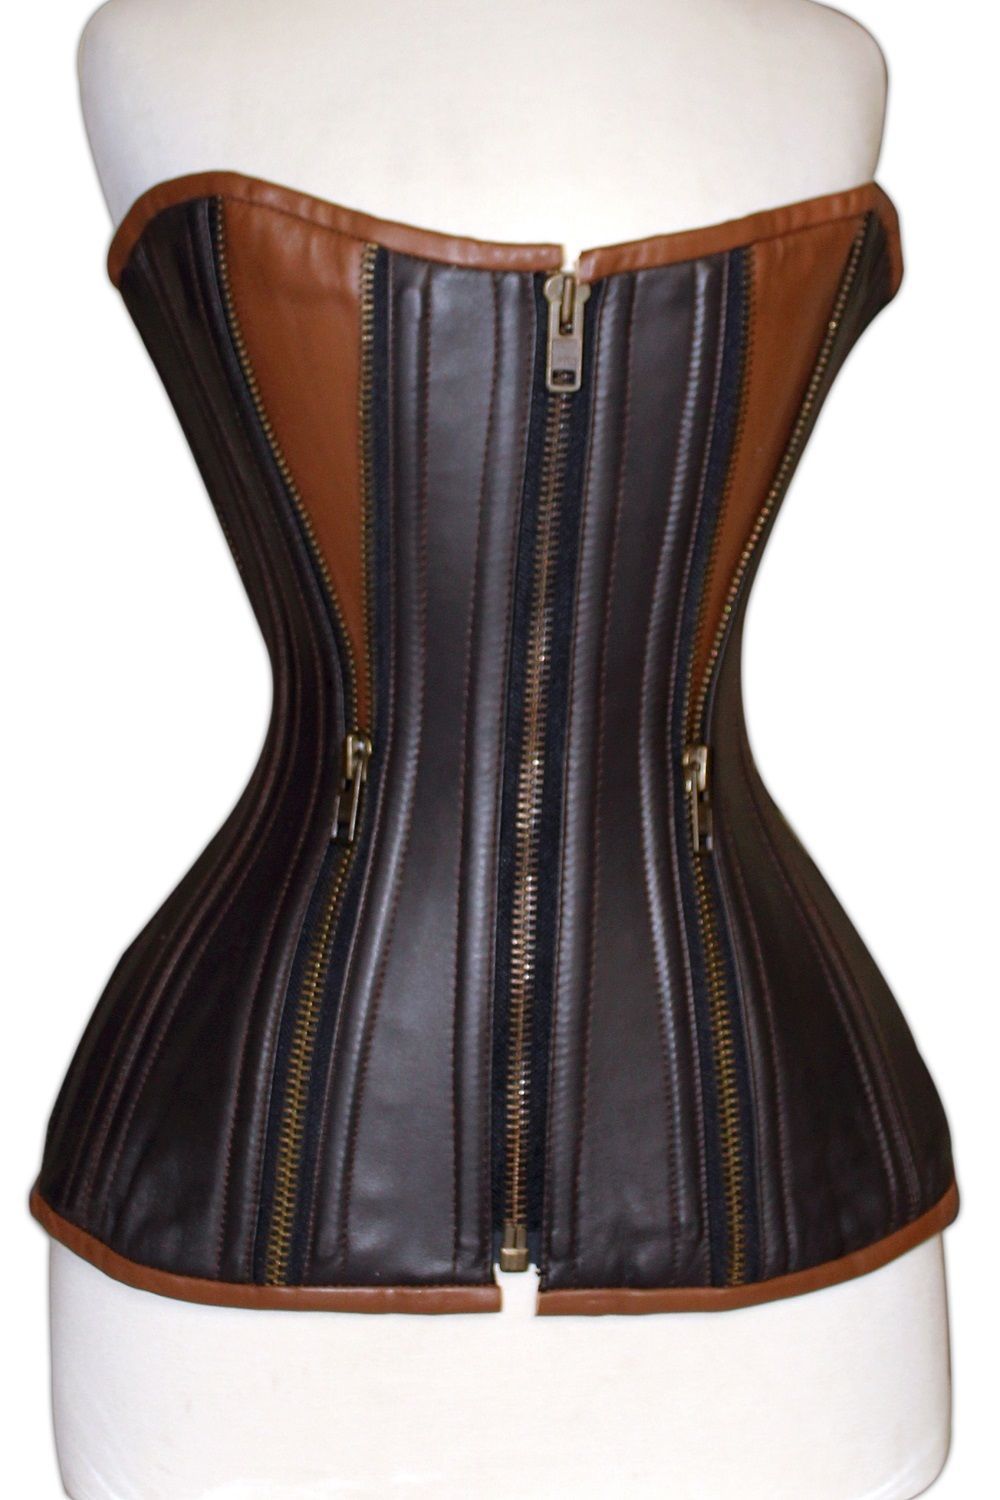 Real Leather Corset SteamPunk Ziper Best Quality